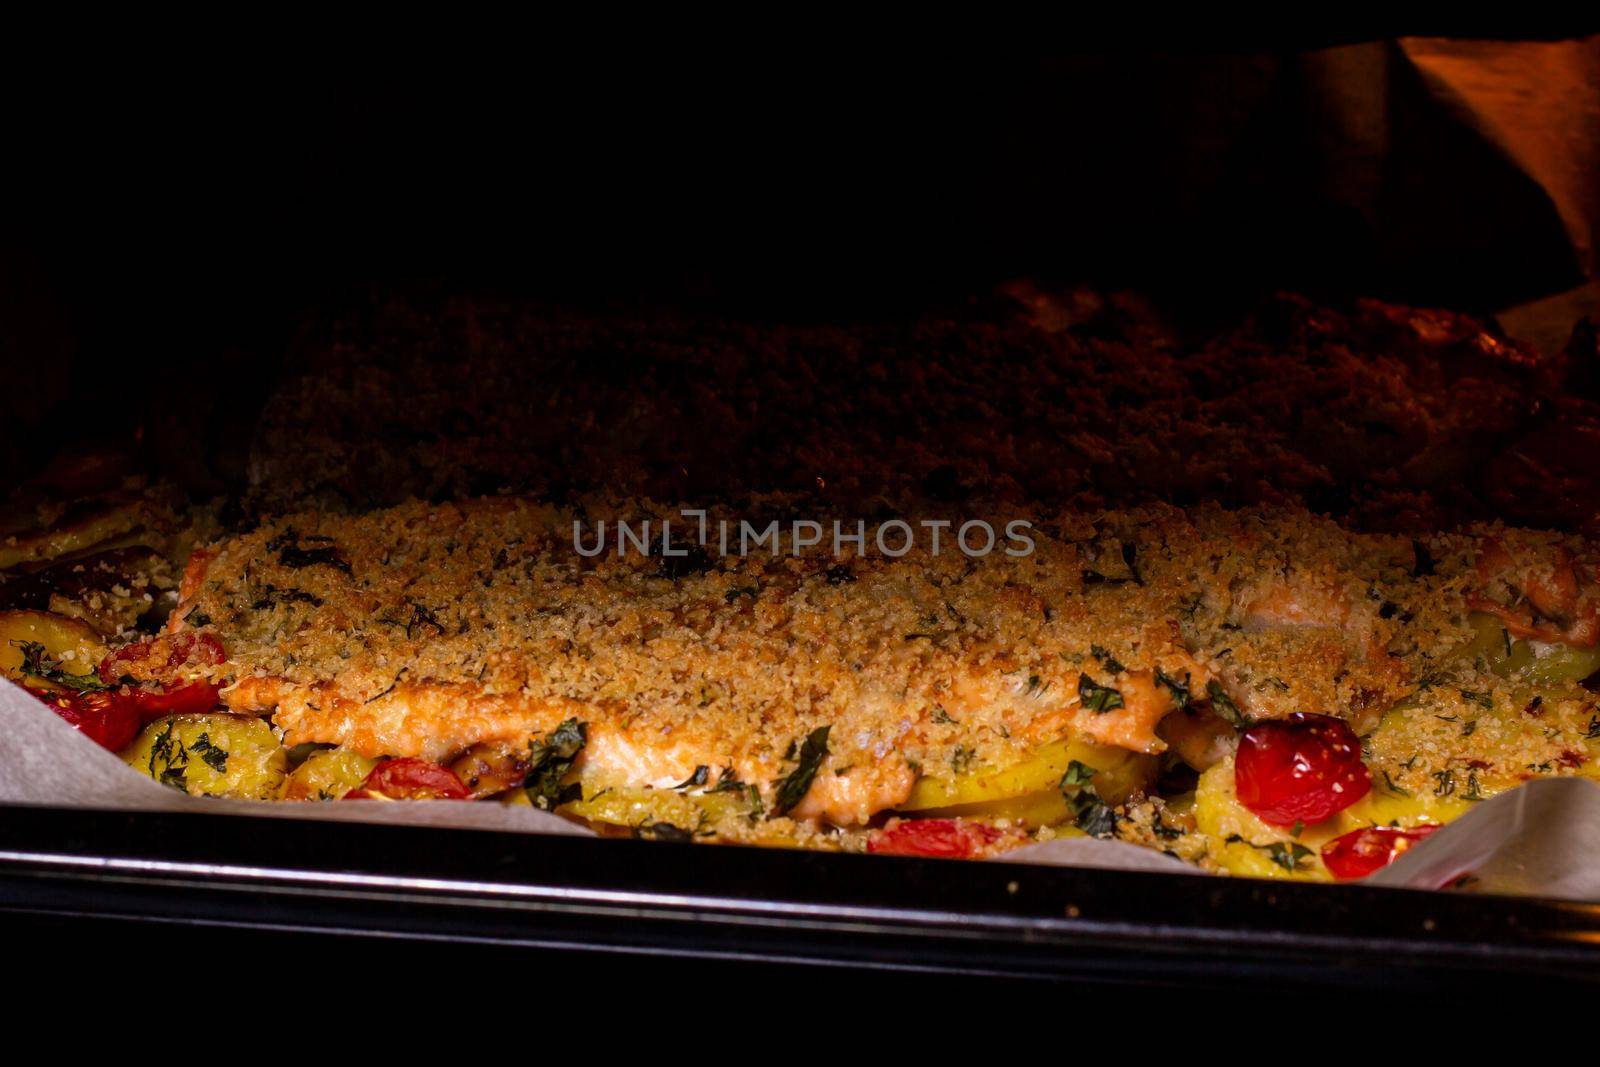 Trout with vegetables, bread crumbs with hard cheese, and potatoes cooked in the oven